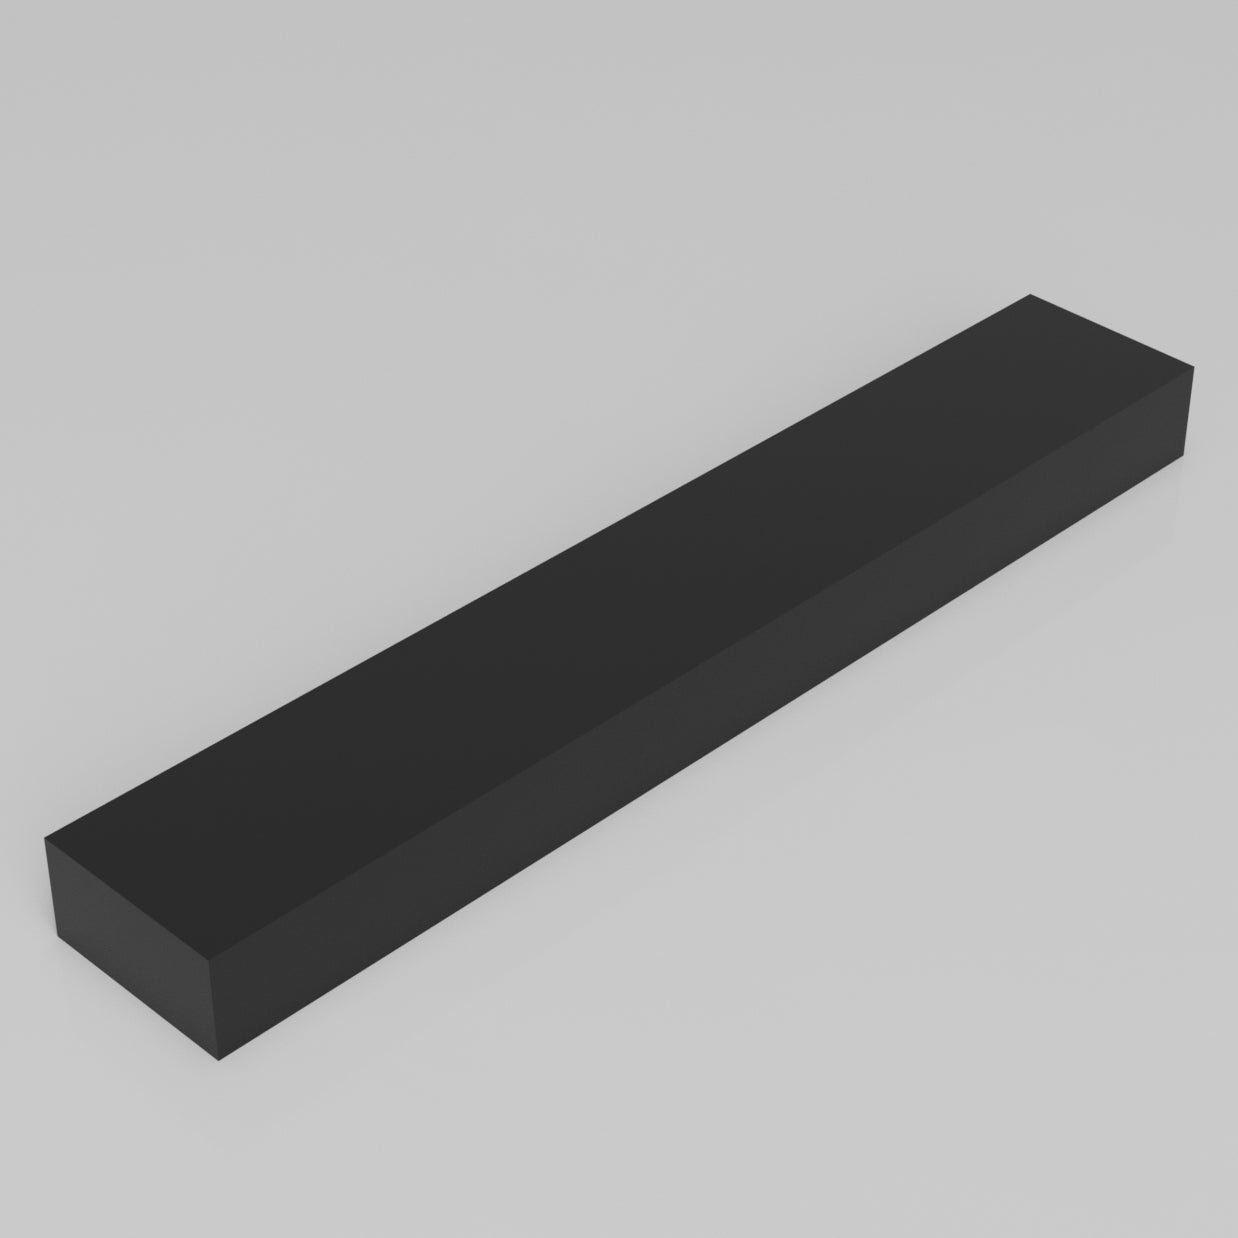 Machinable Wax Rectangular Block Front View 1 Inch by 2 Inch by 12 Inch